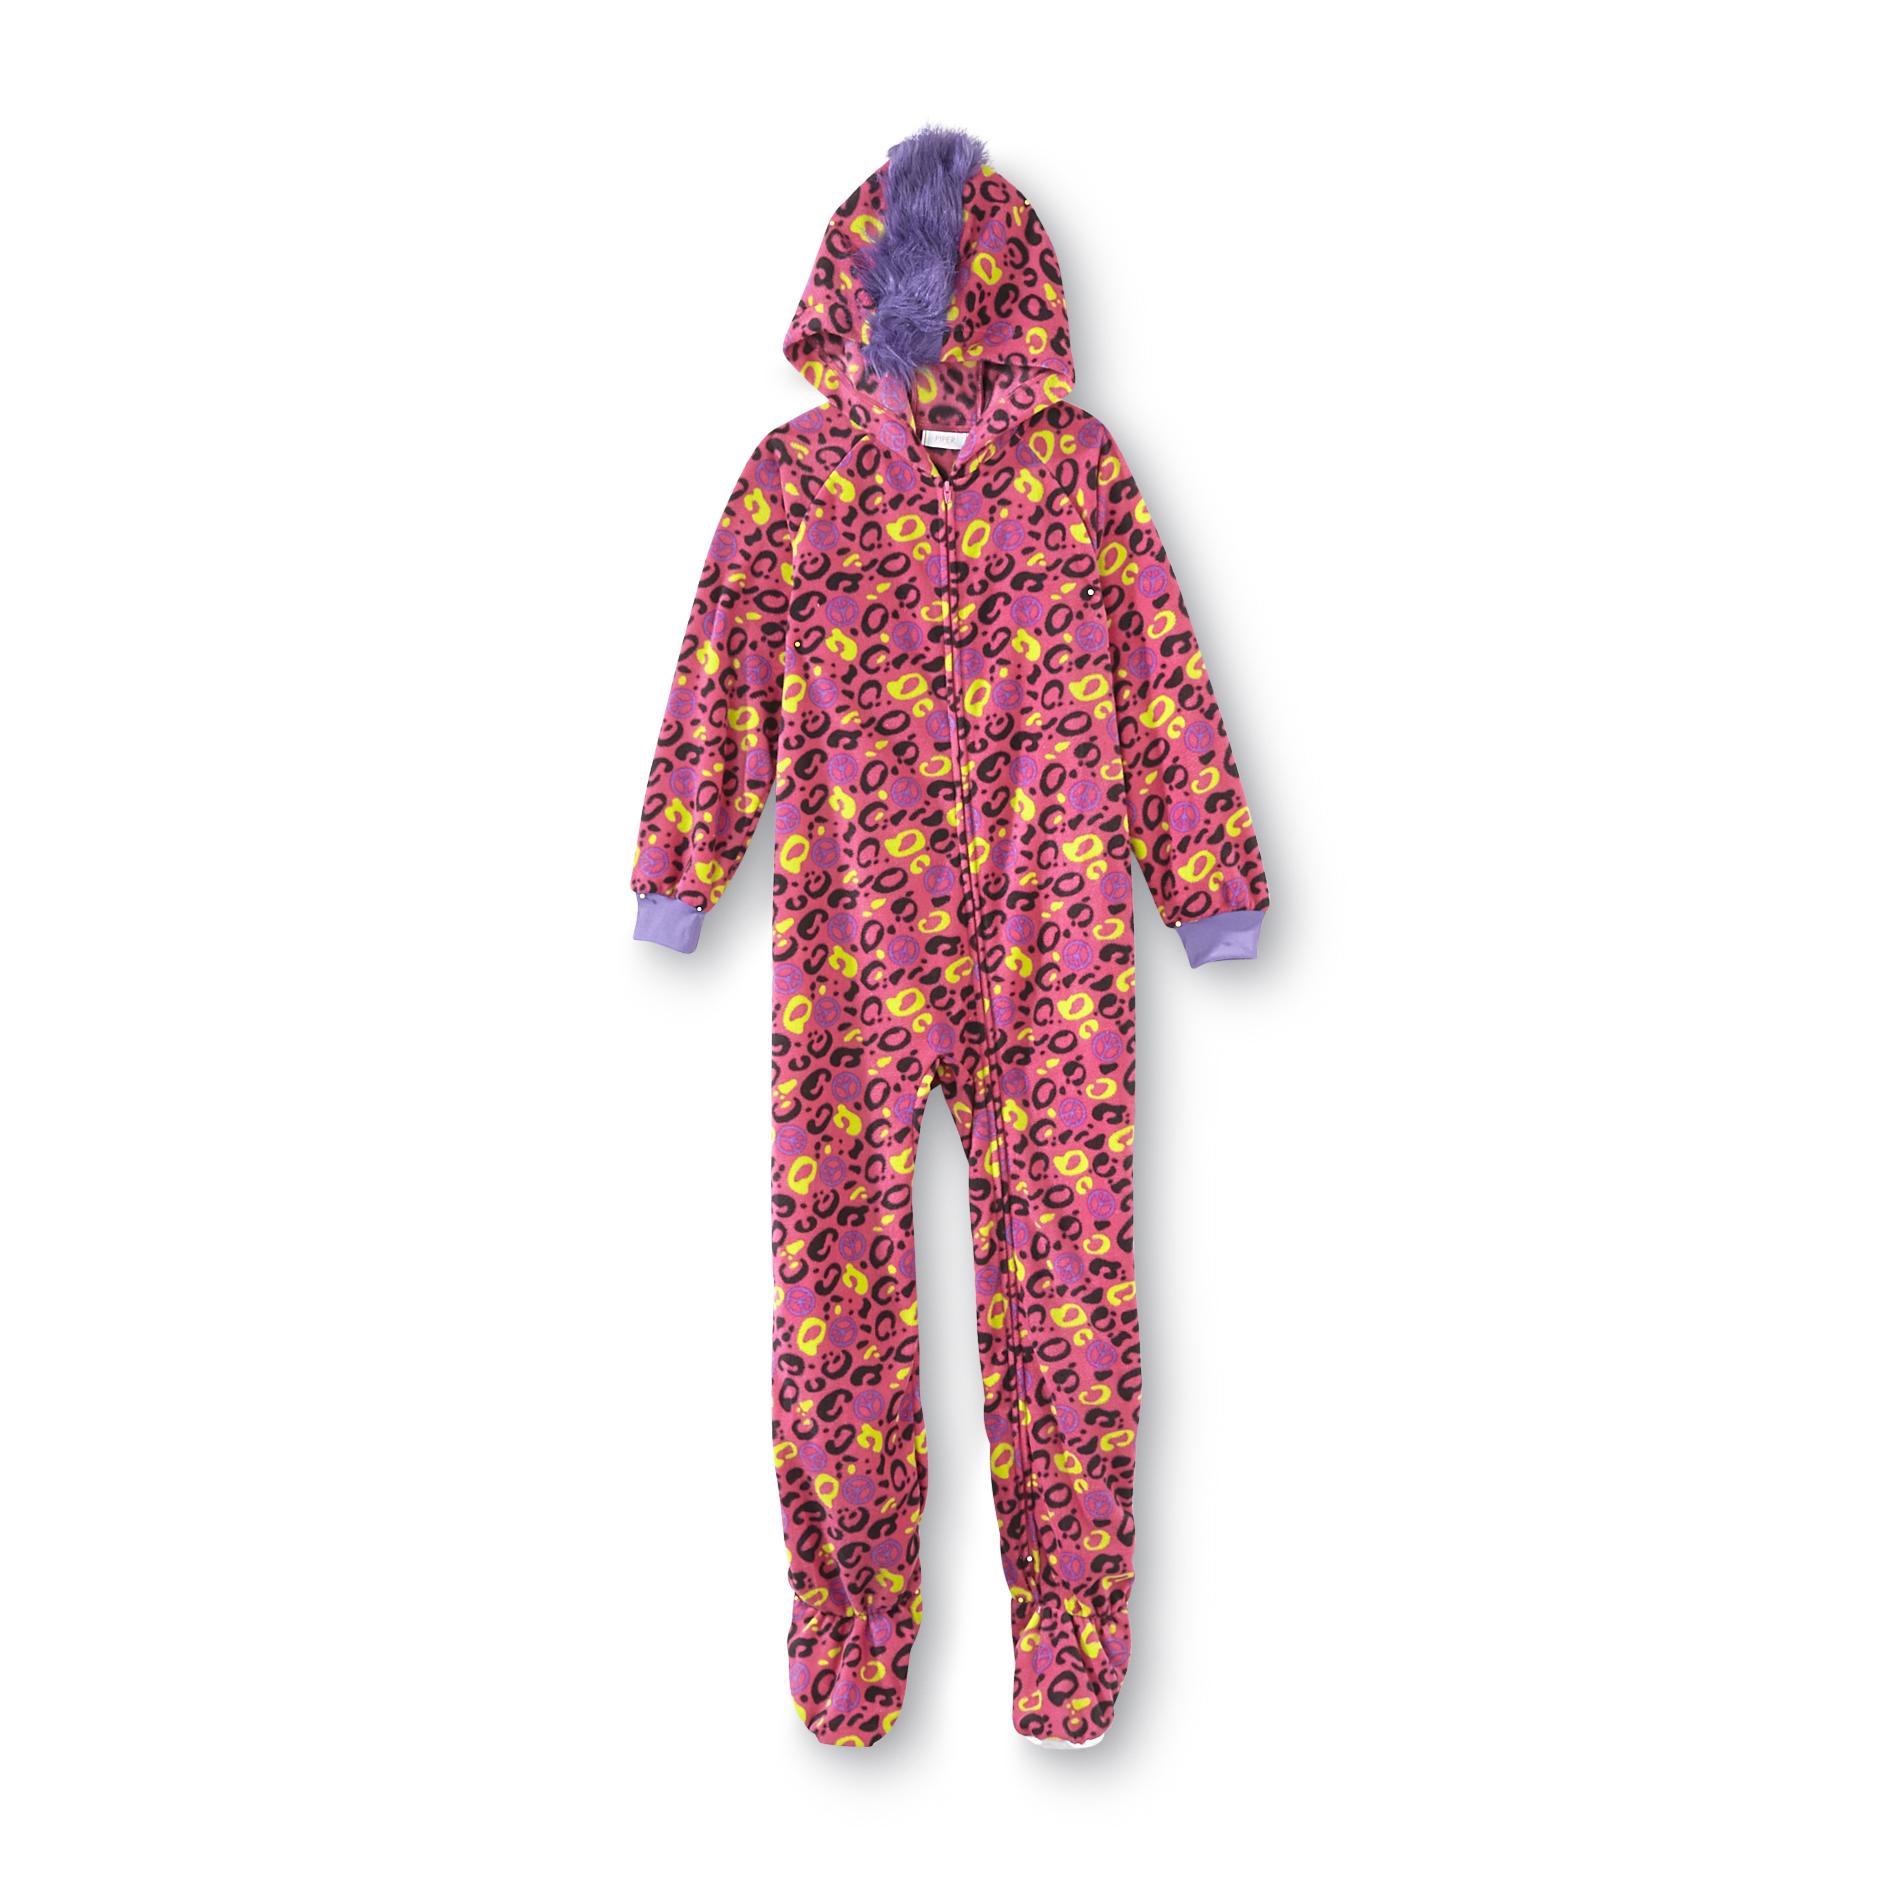 Piper Girl's Fleece Footed Pajamas - Leopard & Peace Sign Print